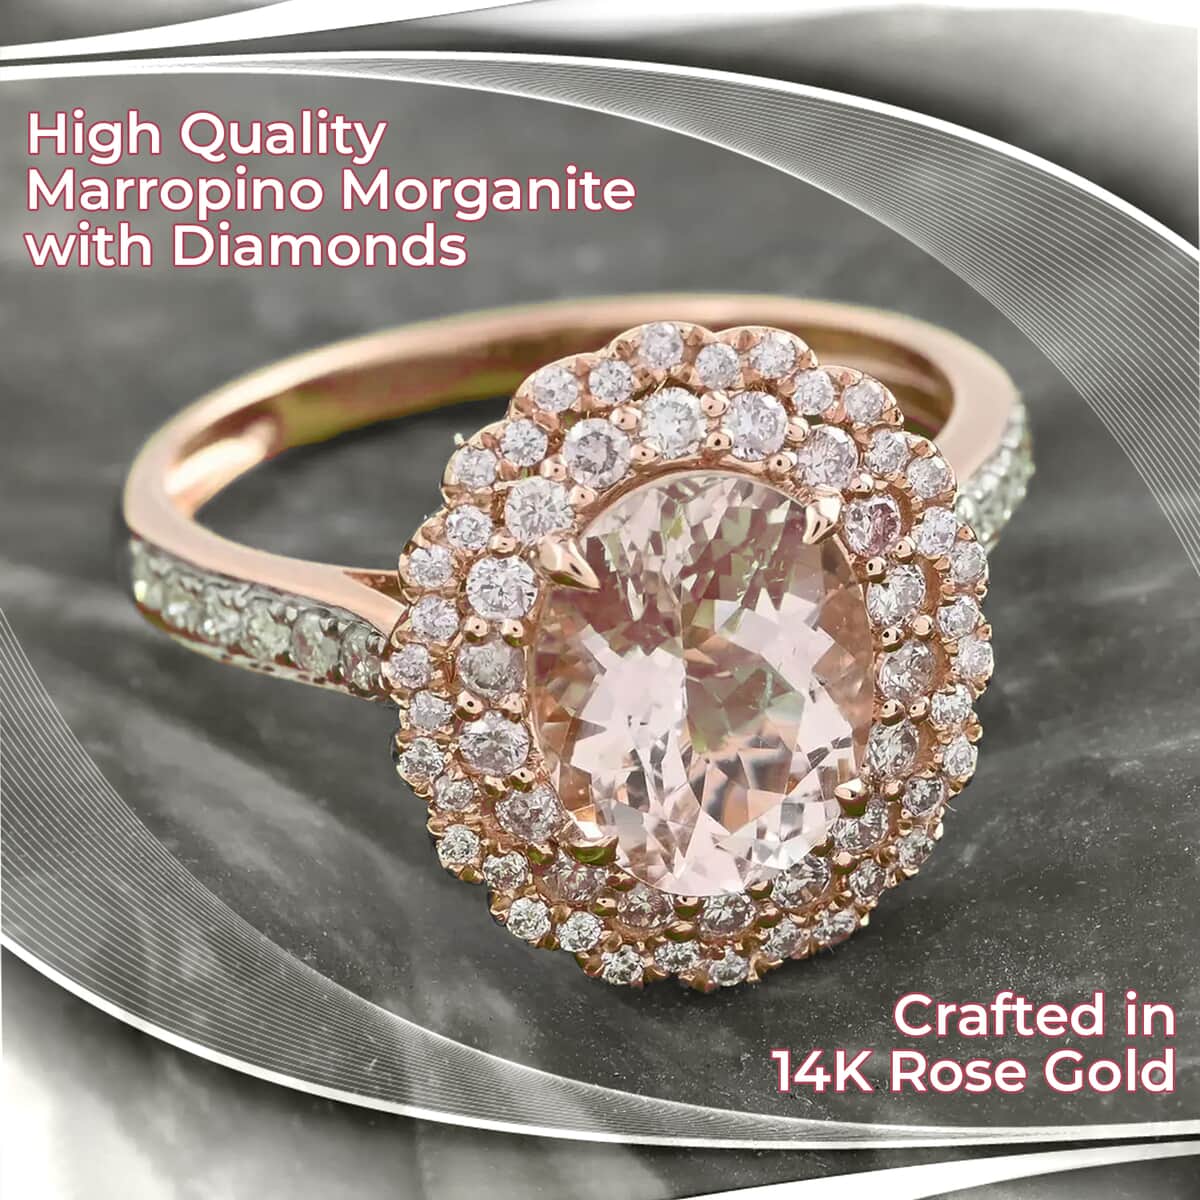 Ankur Treasure Chest Modani Marropino Morganite Ring, 14K Rose Gold Ring, Diamond Floral Halo Ring, Natural Pink And White Diamond Accent Ring, Promise Rings 1.95 ctw (Size 5.0) image number 1